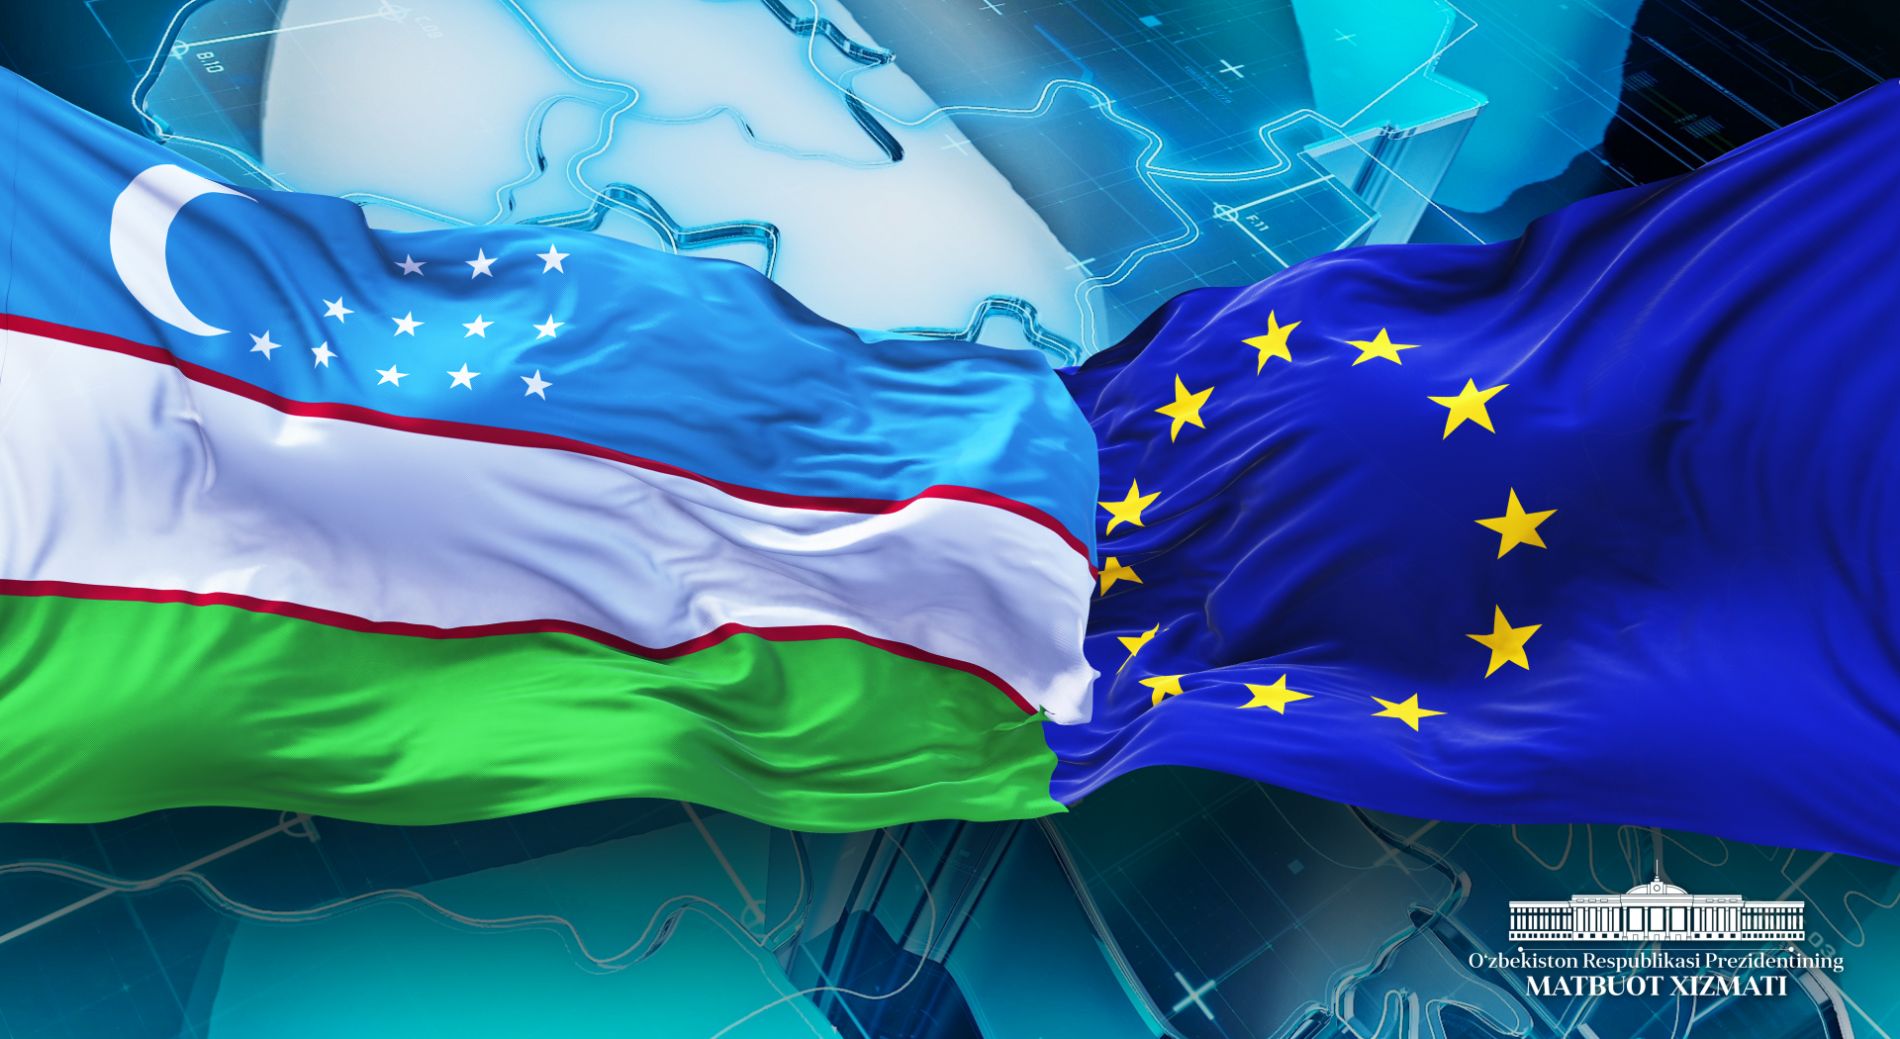 Uzbekistan and the EU actively contribute to stabilizing Afghanistan through collaborative efforts